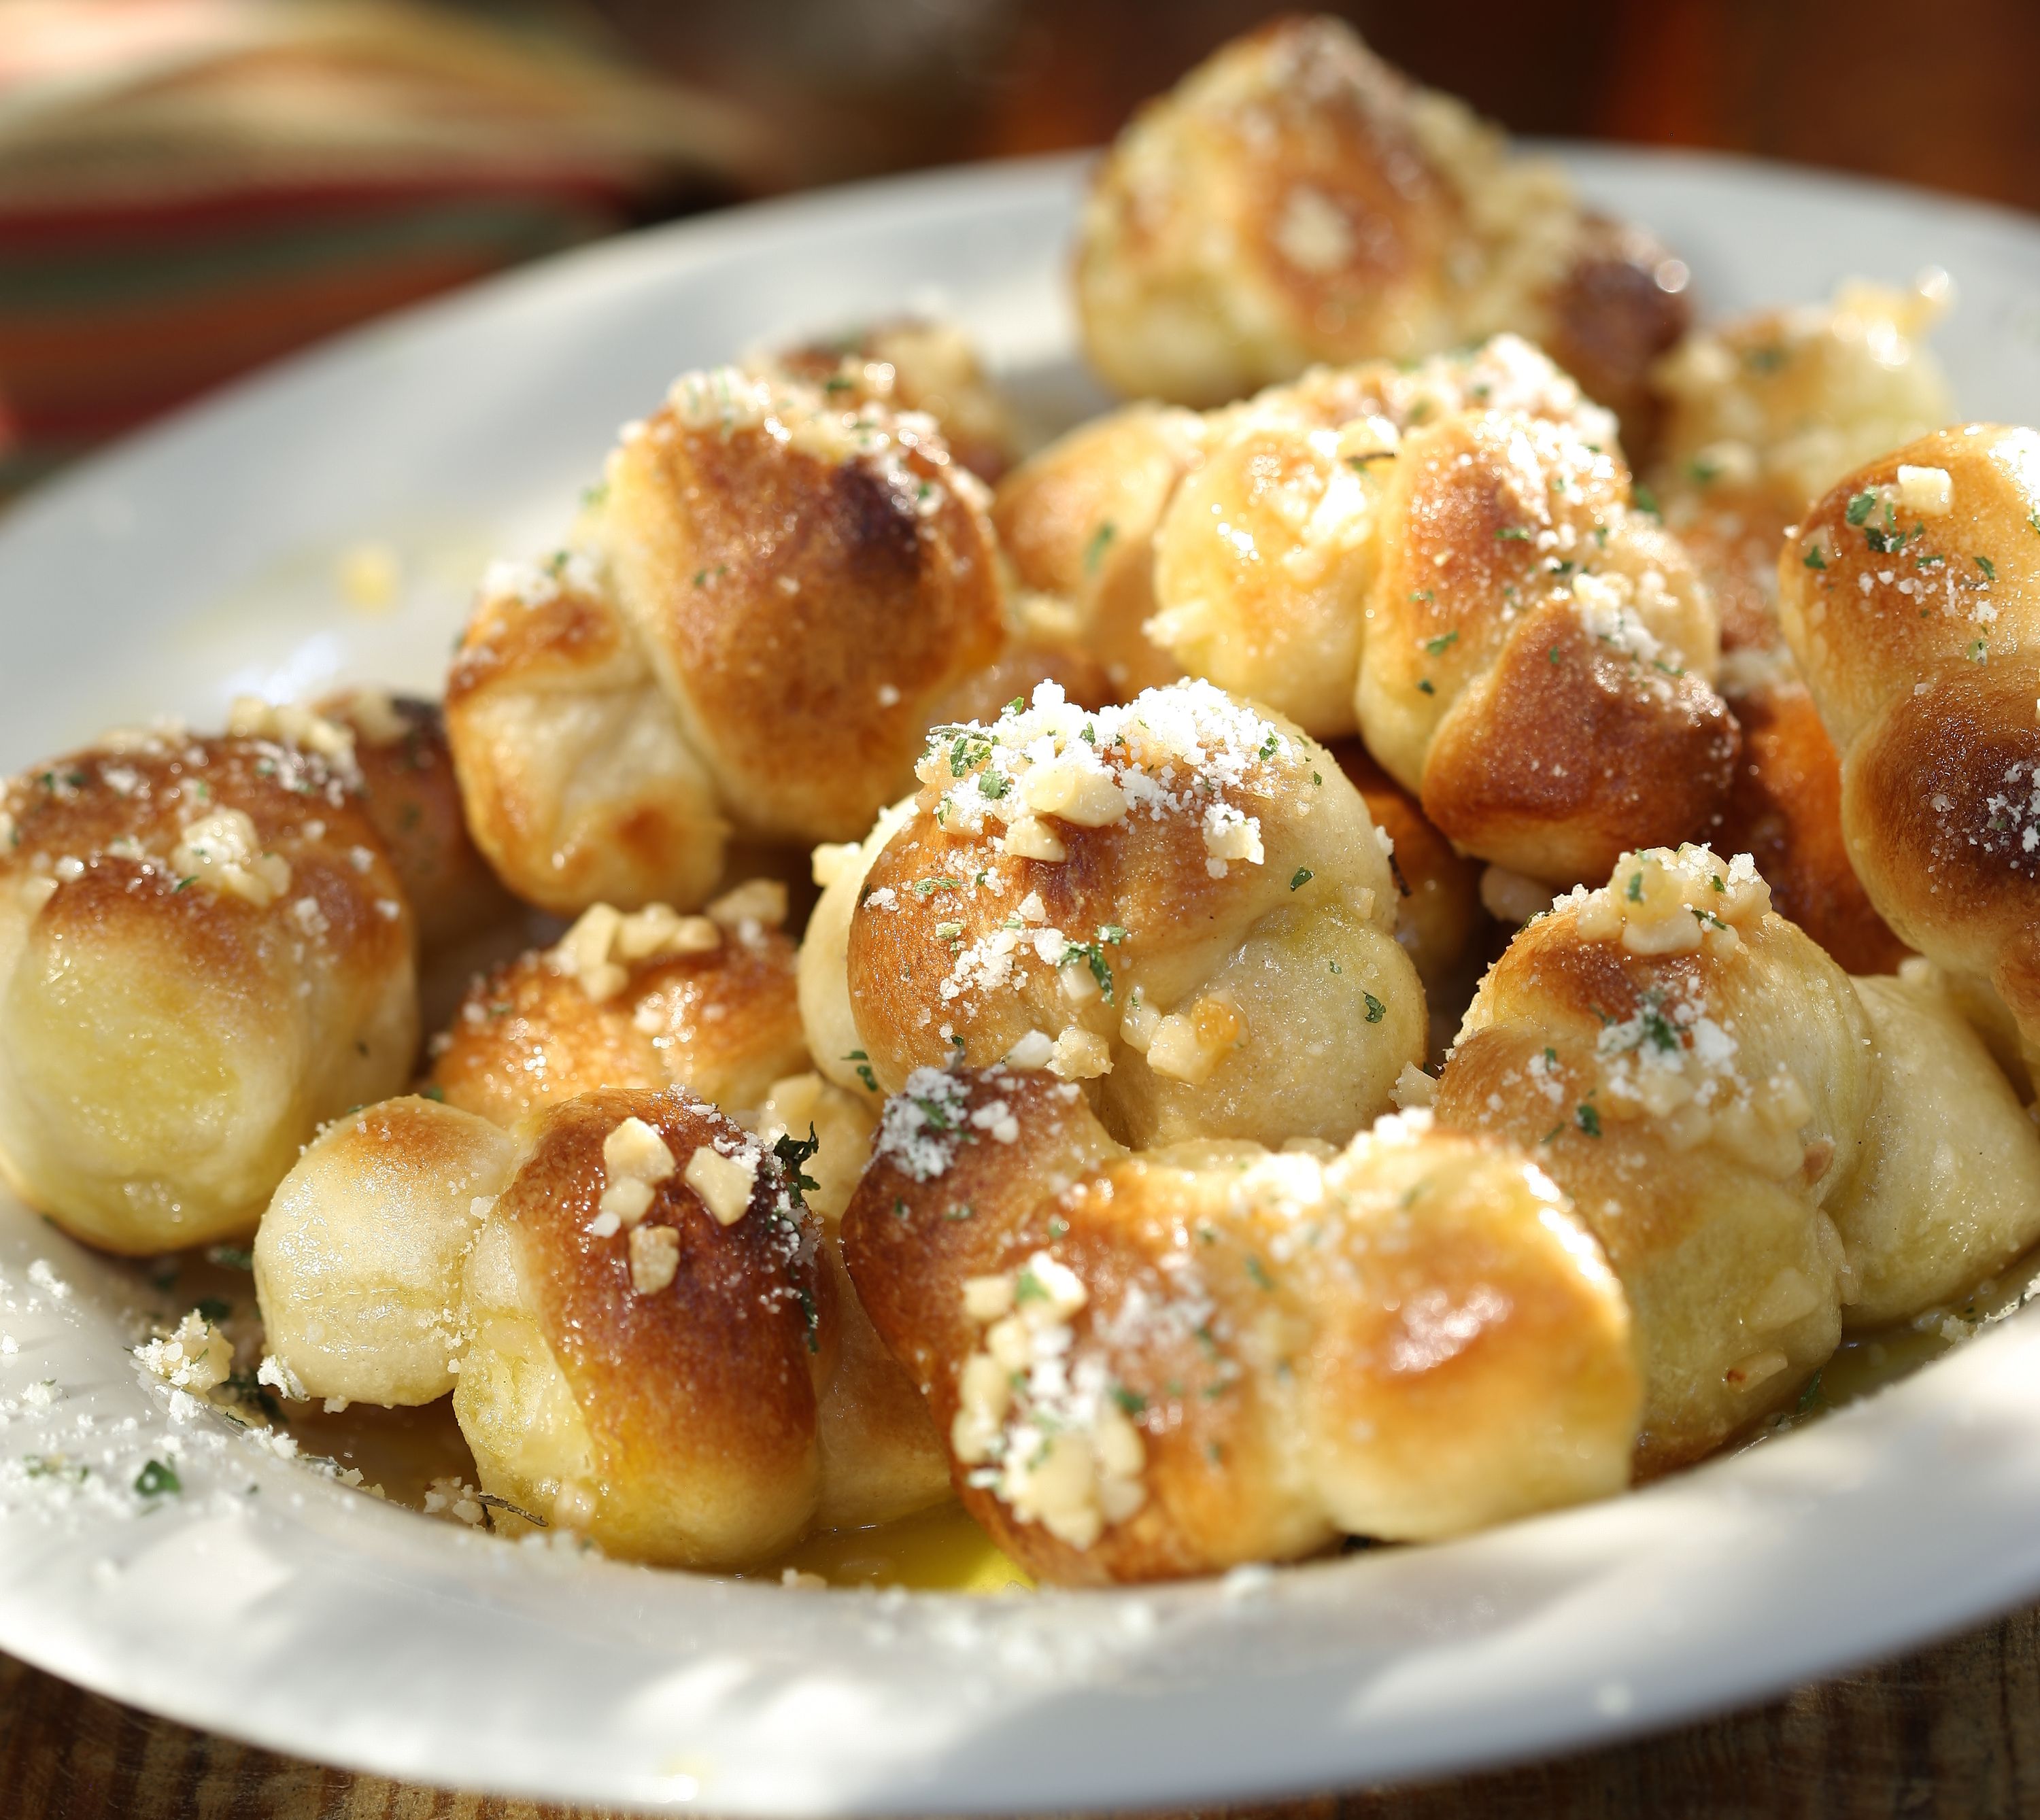 MINI GARLIC KNOTS - Our pizza dough rolled and tied into knots, baked, then smothered in melted butter and fresh garlic. Served with a side of marinara.